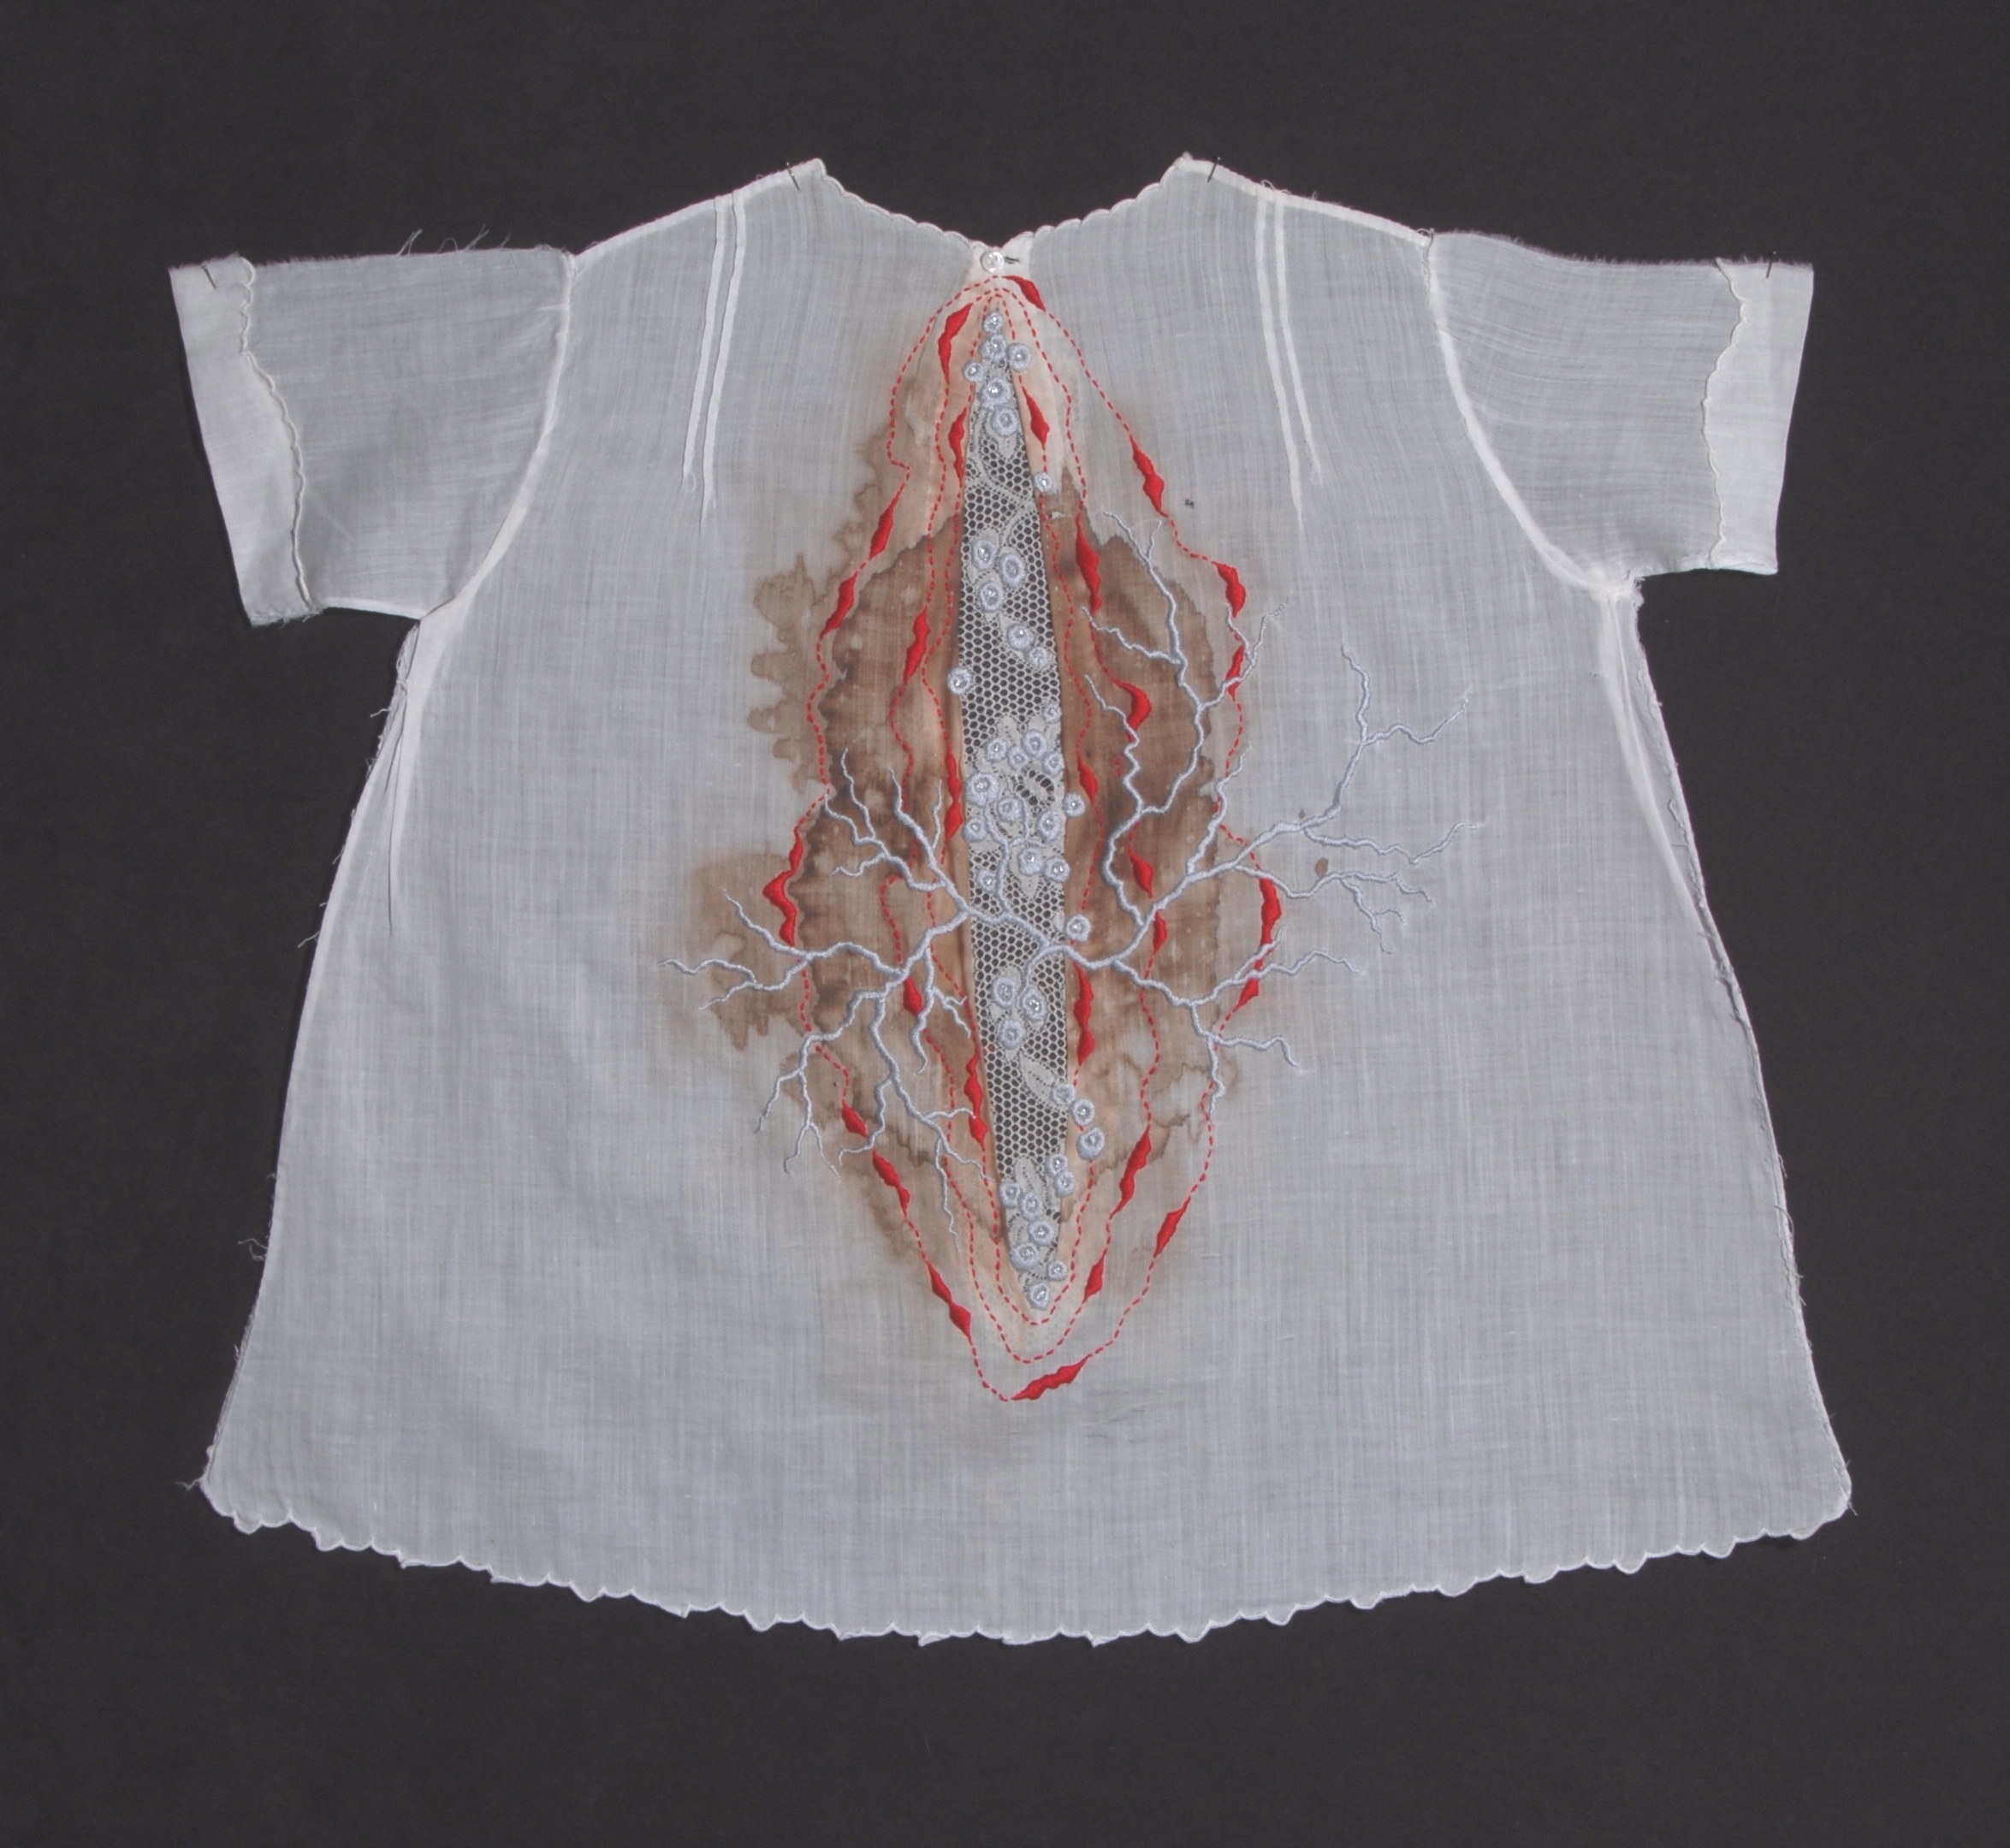 Erin Endicott is a textile artist with an experimental approach and greatly influenced by nature.